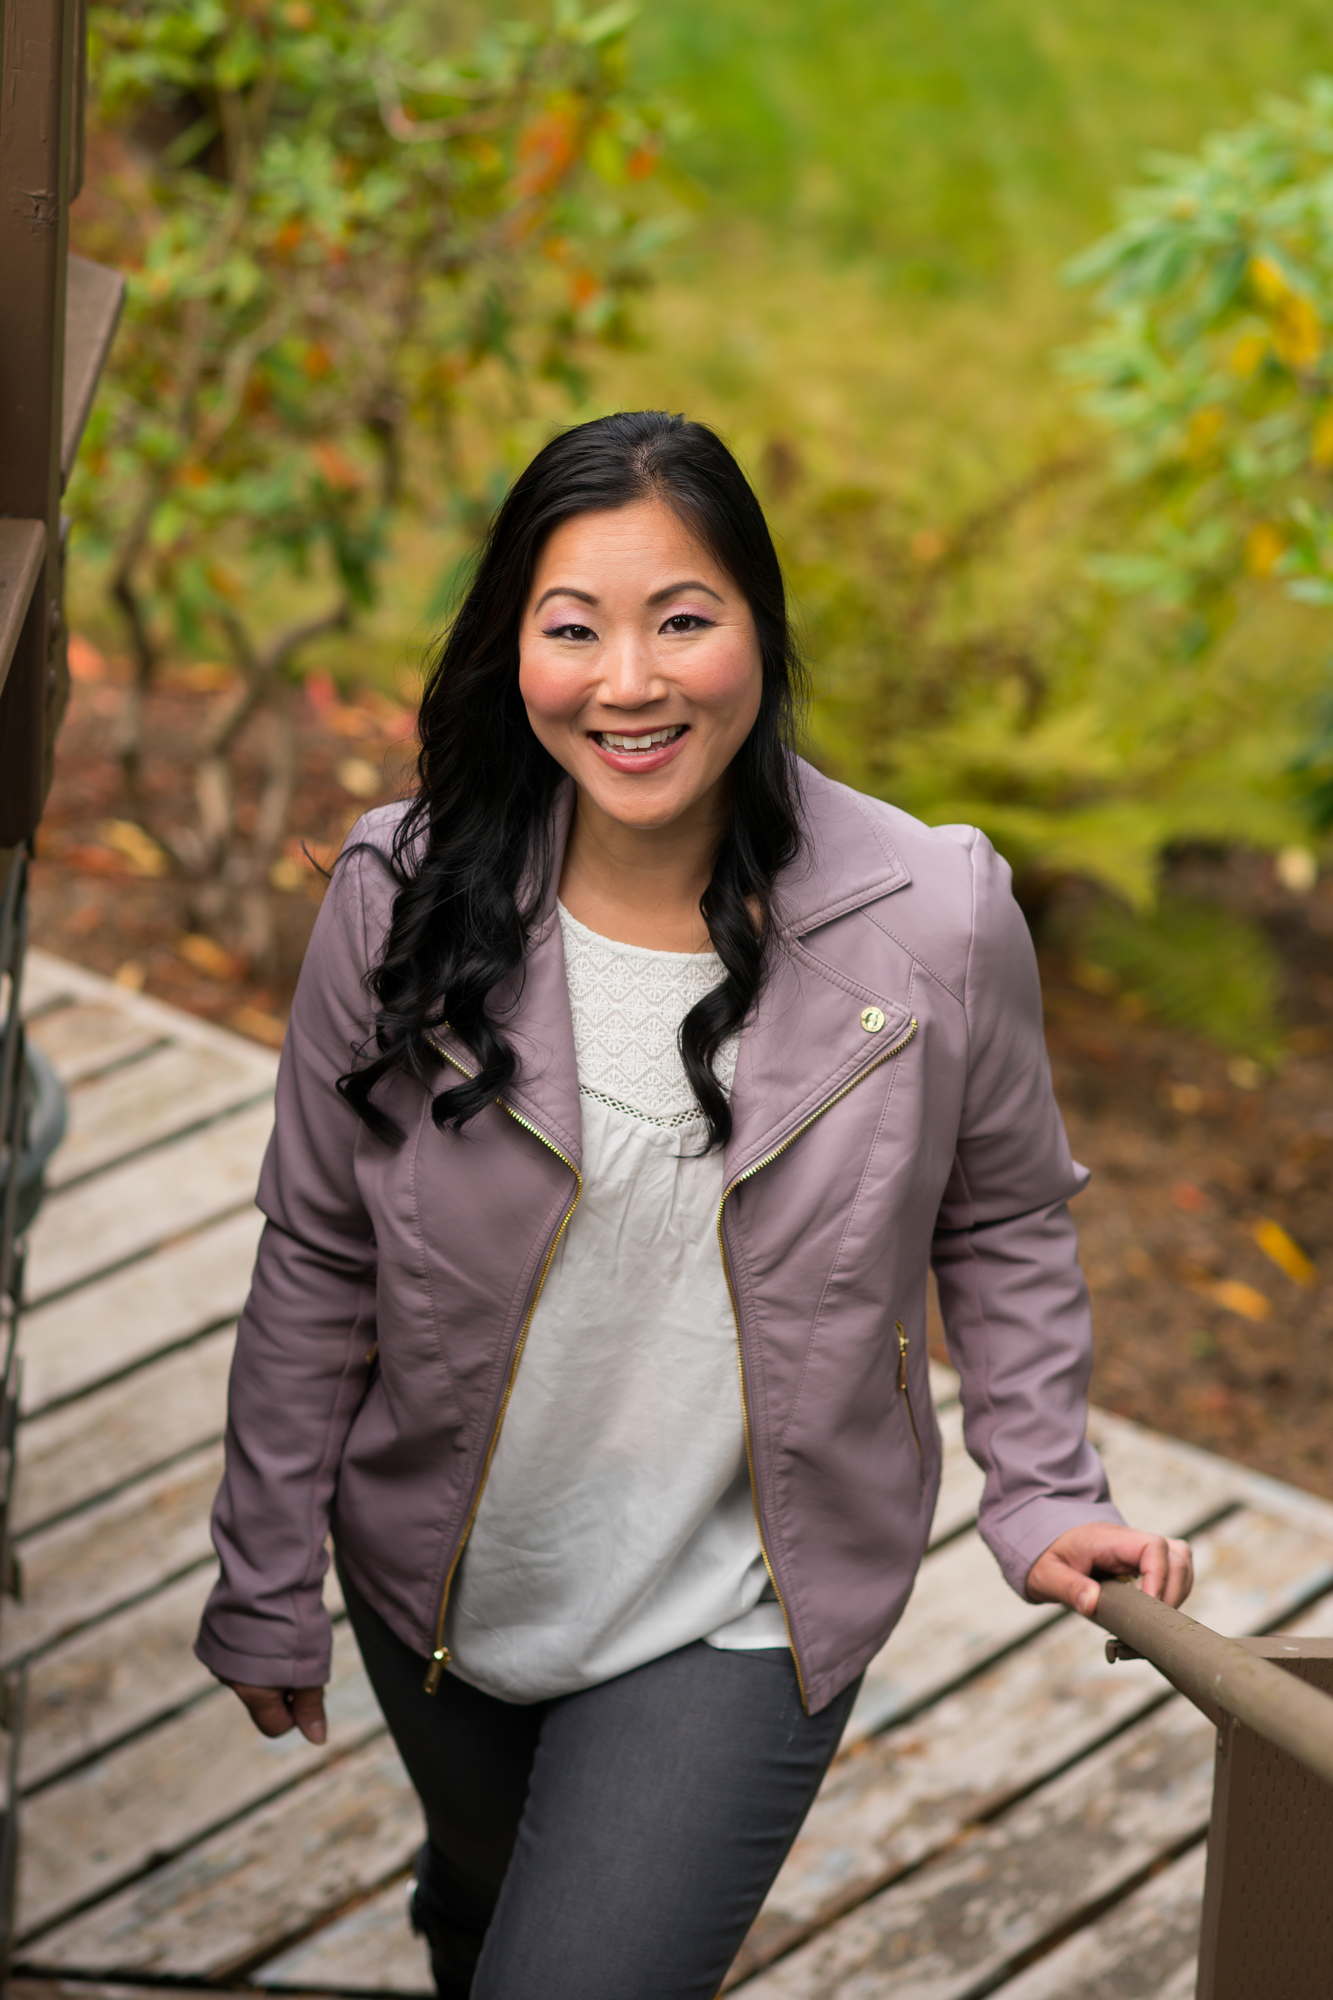 A Brown woman wearing a lavendar jacket poses on a deck outdoors in the PNW